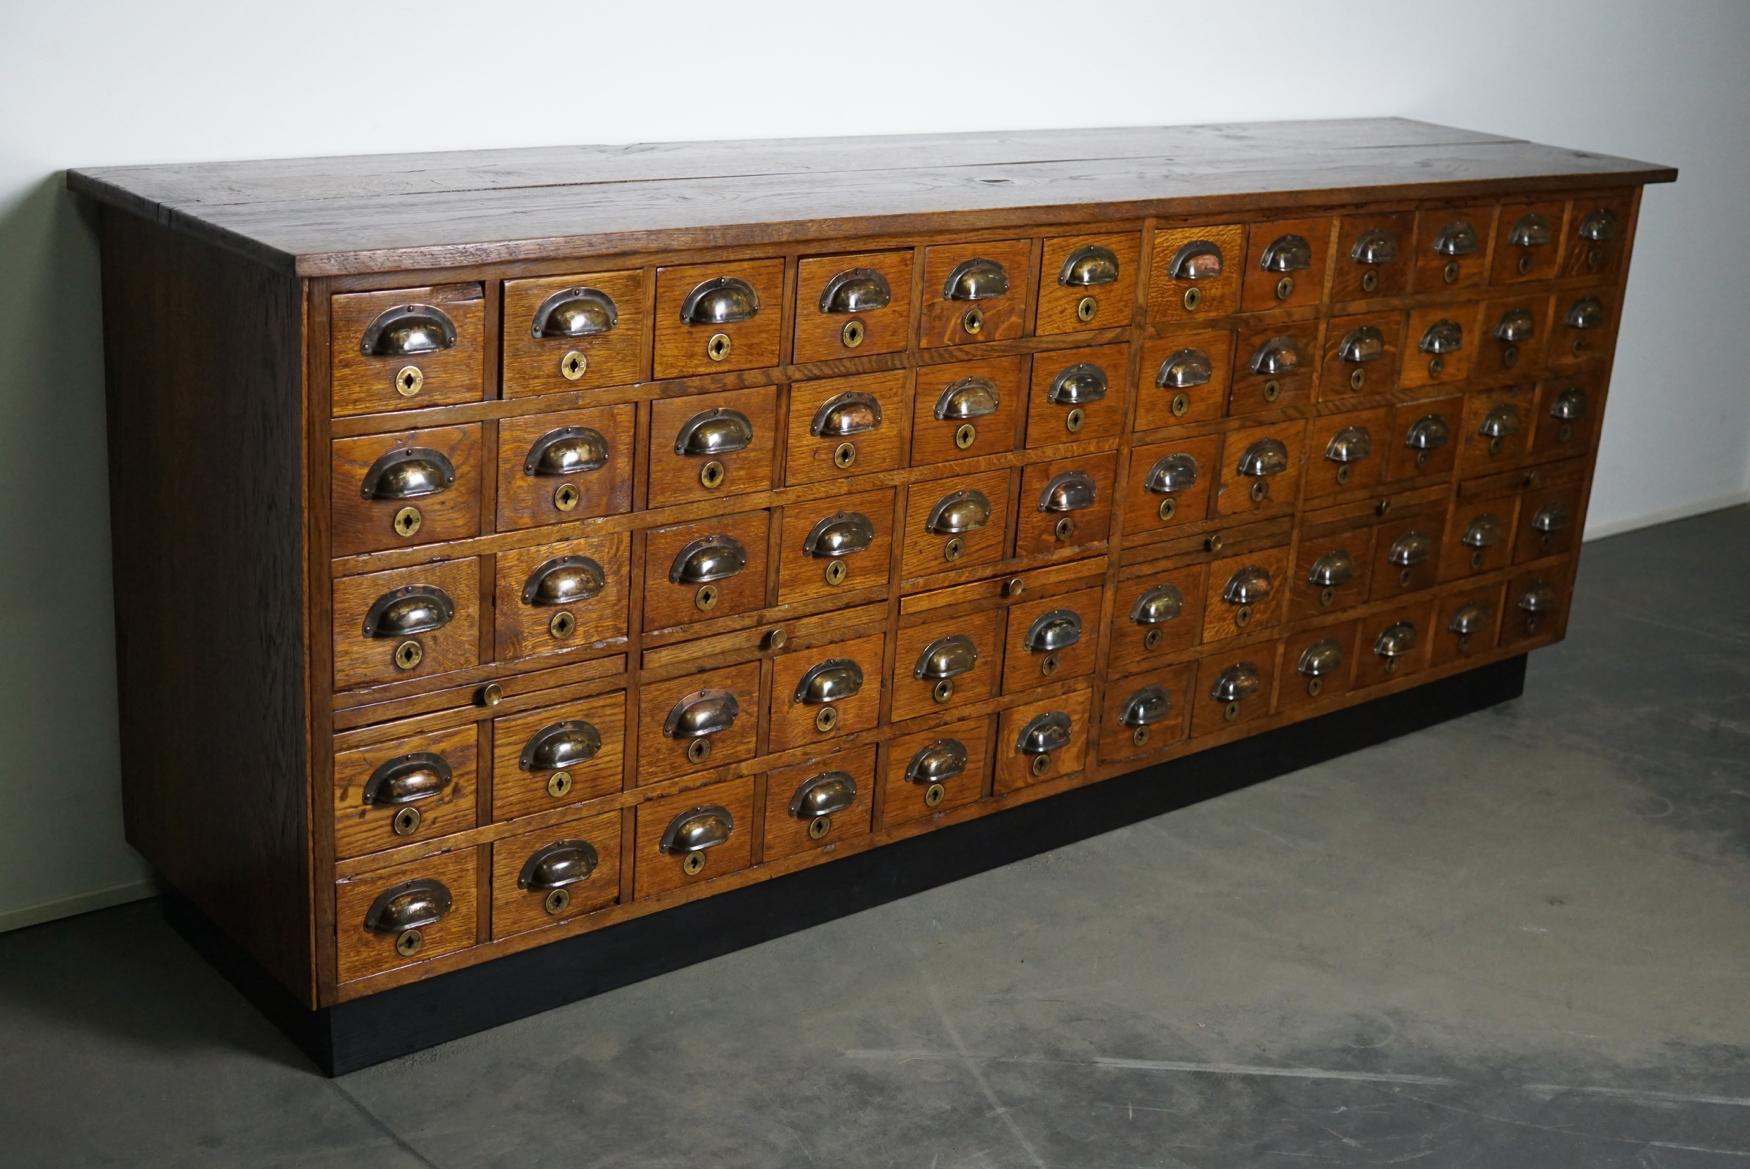 This apothecary cabinet was made circa 1930s in the Netherlands. It features 60 drawers with nice brass handles. The interior dimensions of the drawers are: D x W x H 36 x 13 x 4.5 / 9 cm.